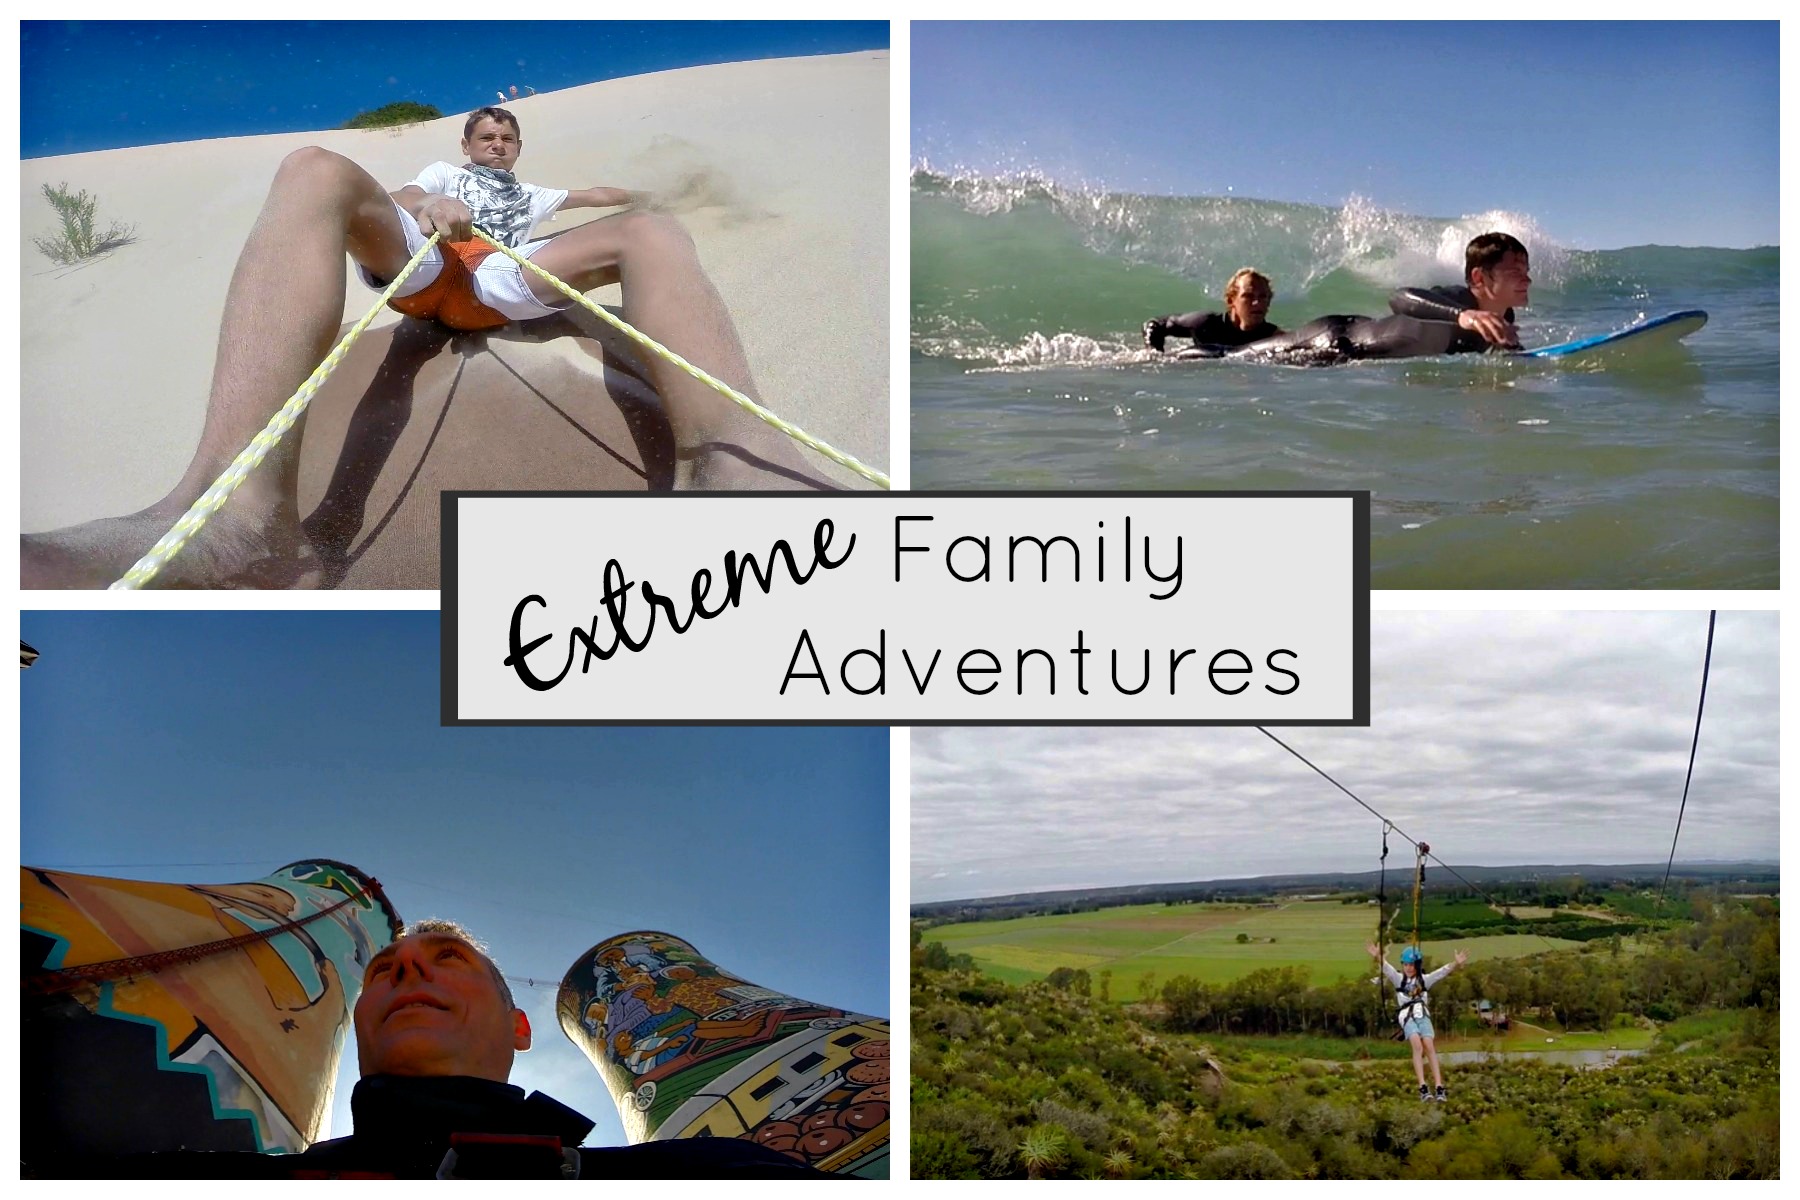 Extreme Family Adventures, “For the Sake of the Blog”